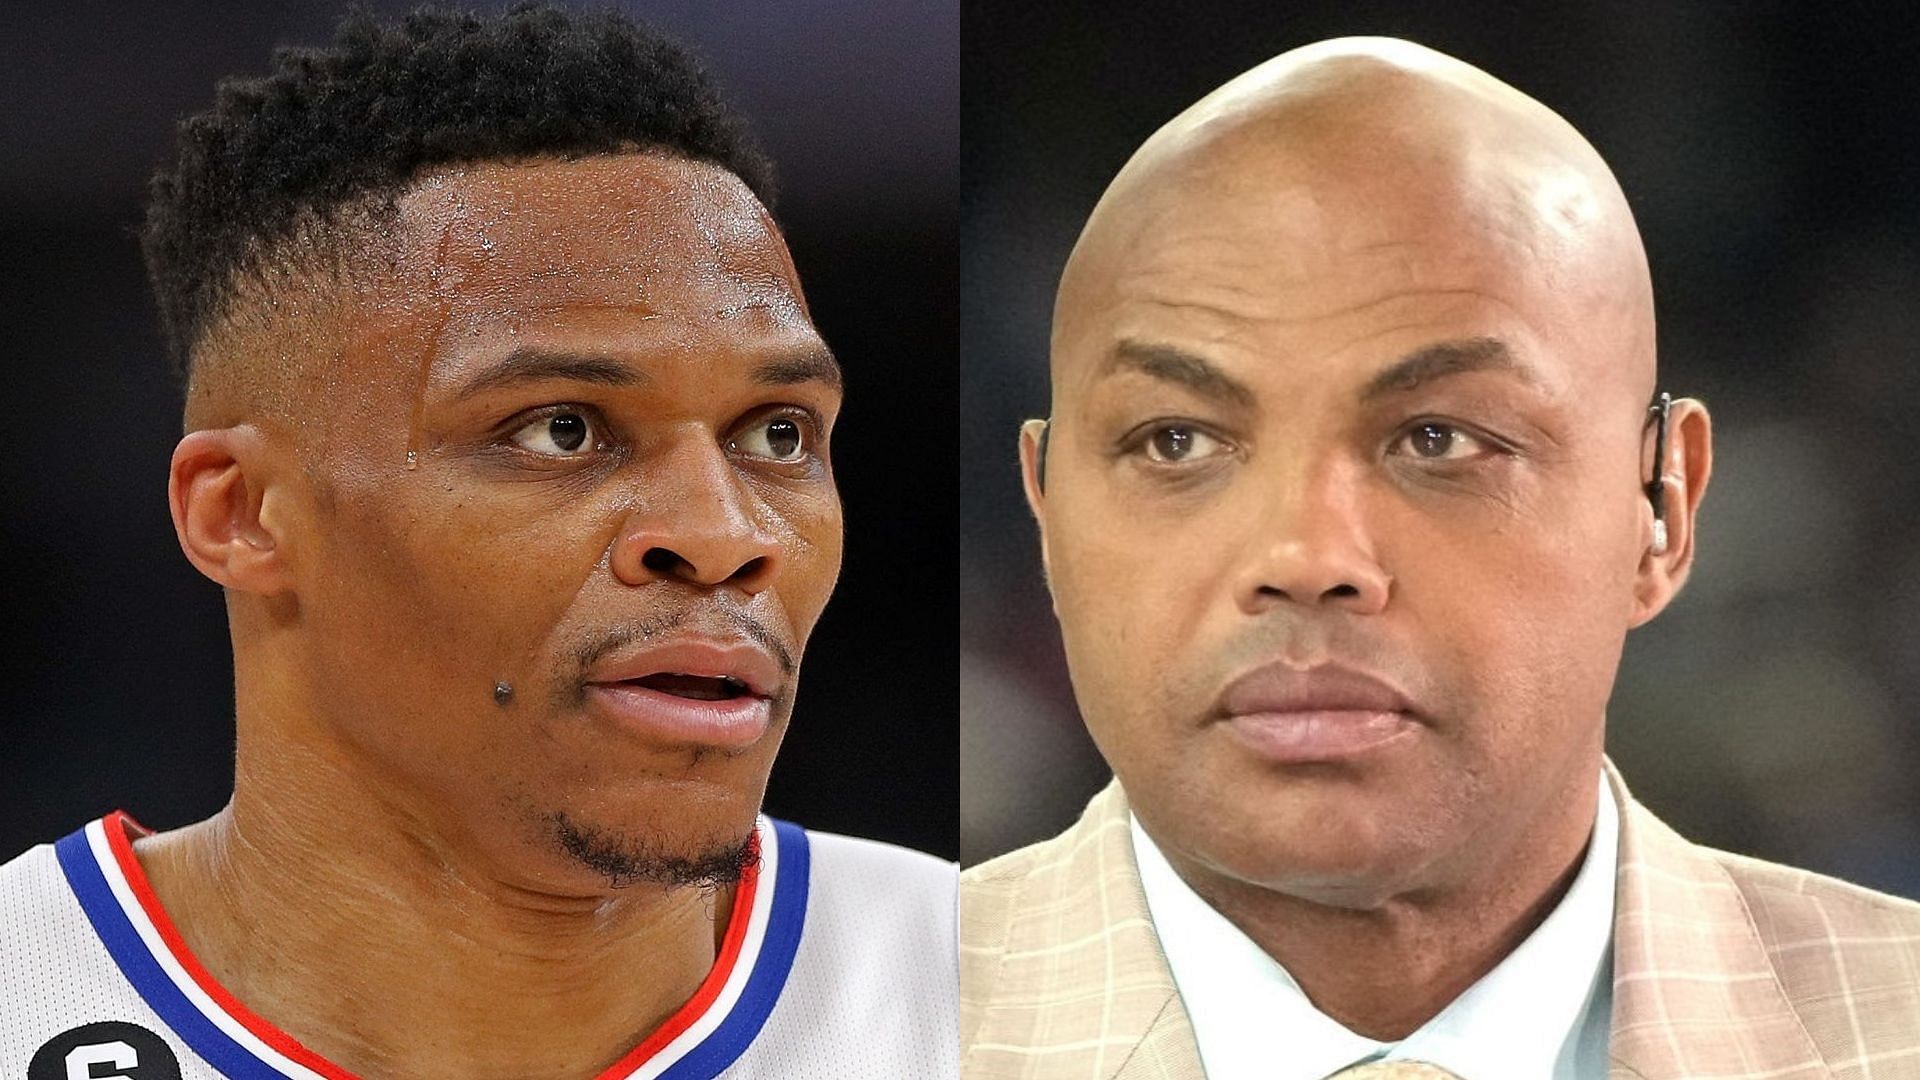 Russell Westbrook and Charles Barkley (Image credit: Justin Ford and Mitchell Layton/Getty Images)